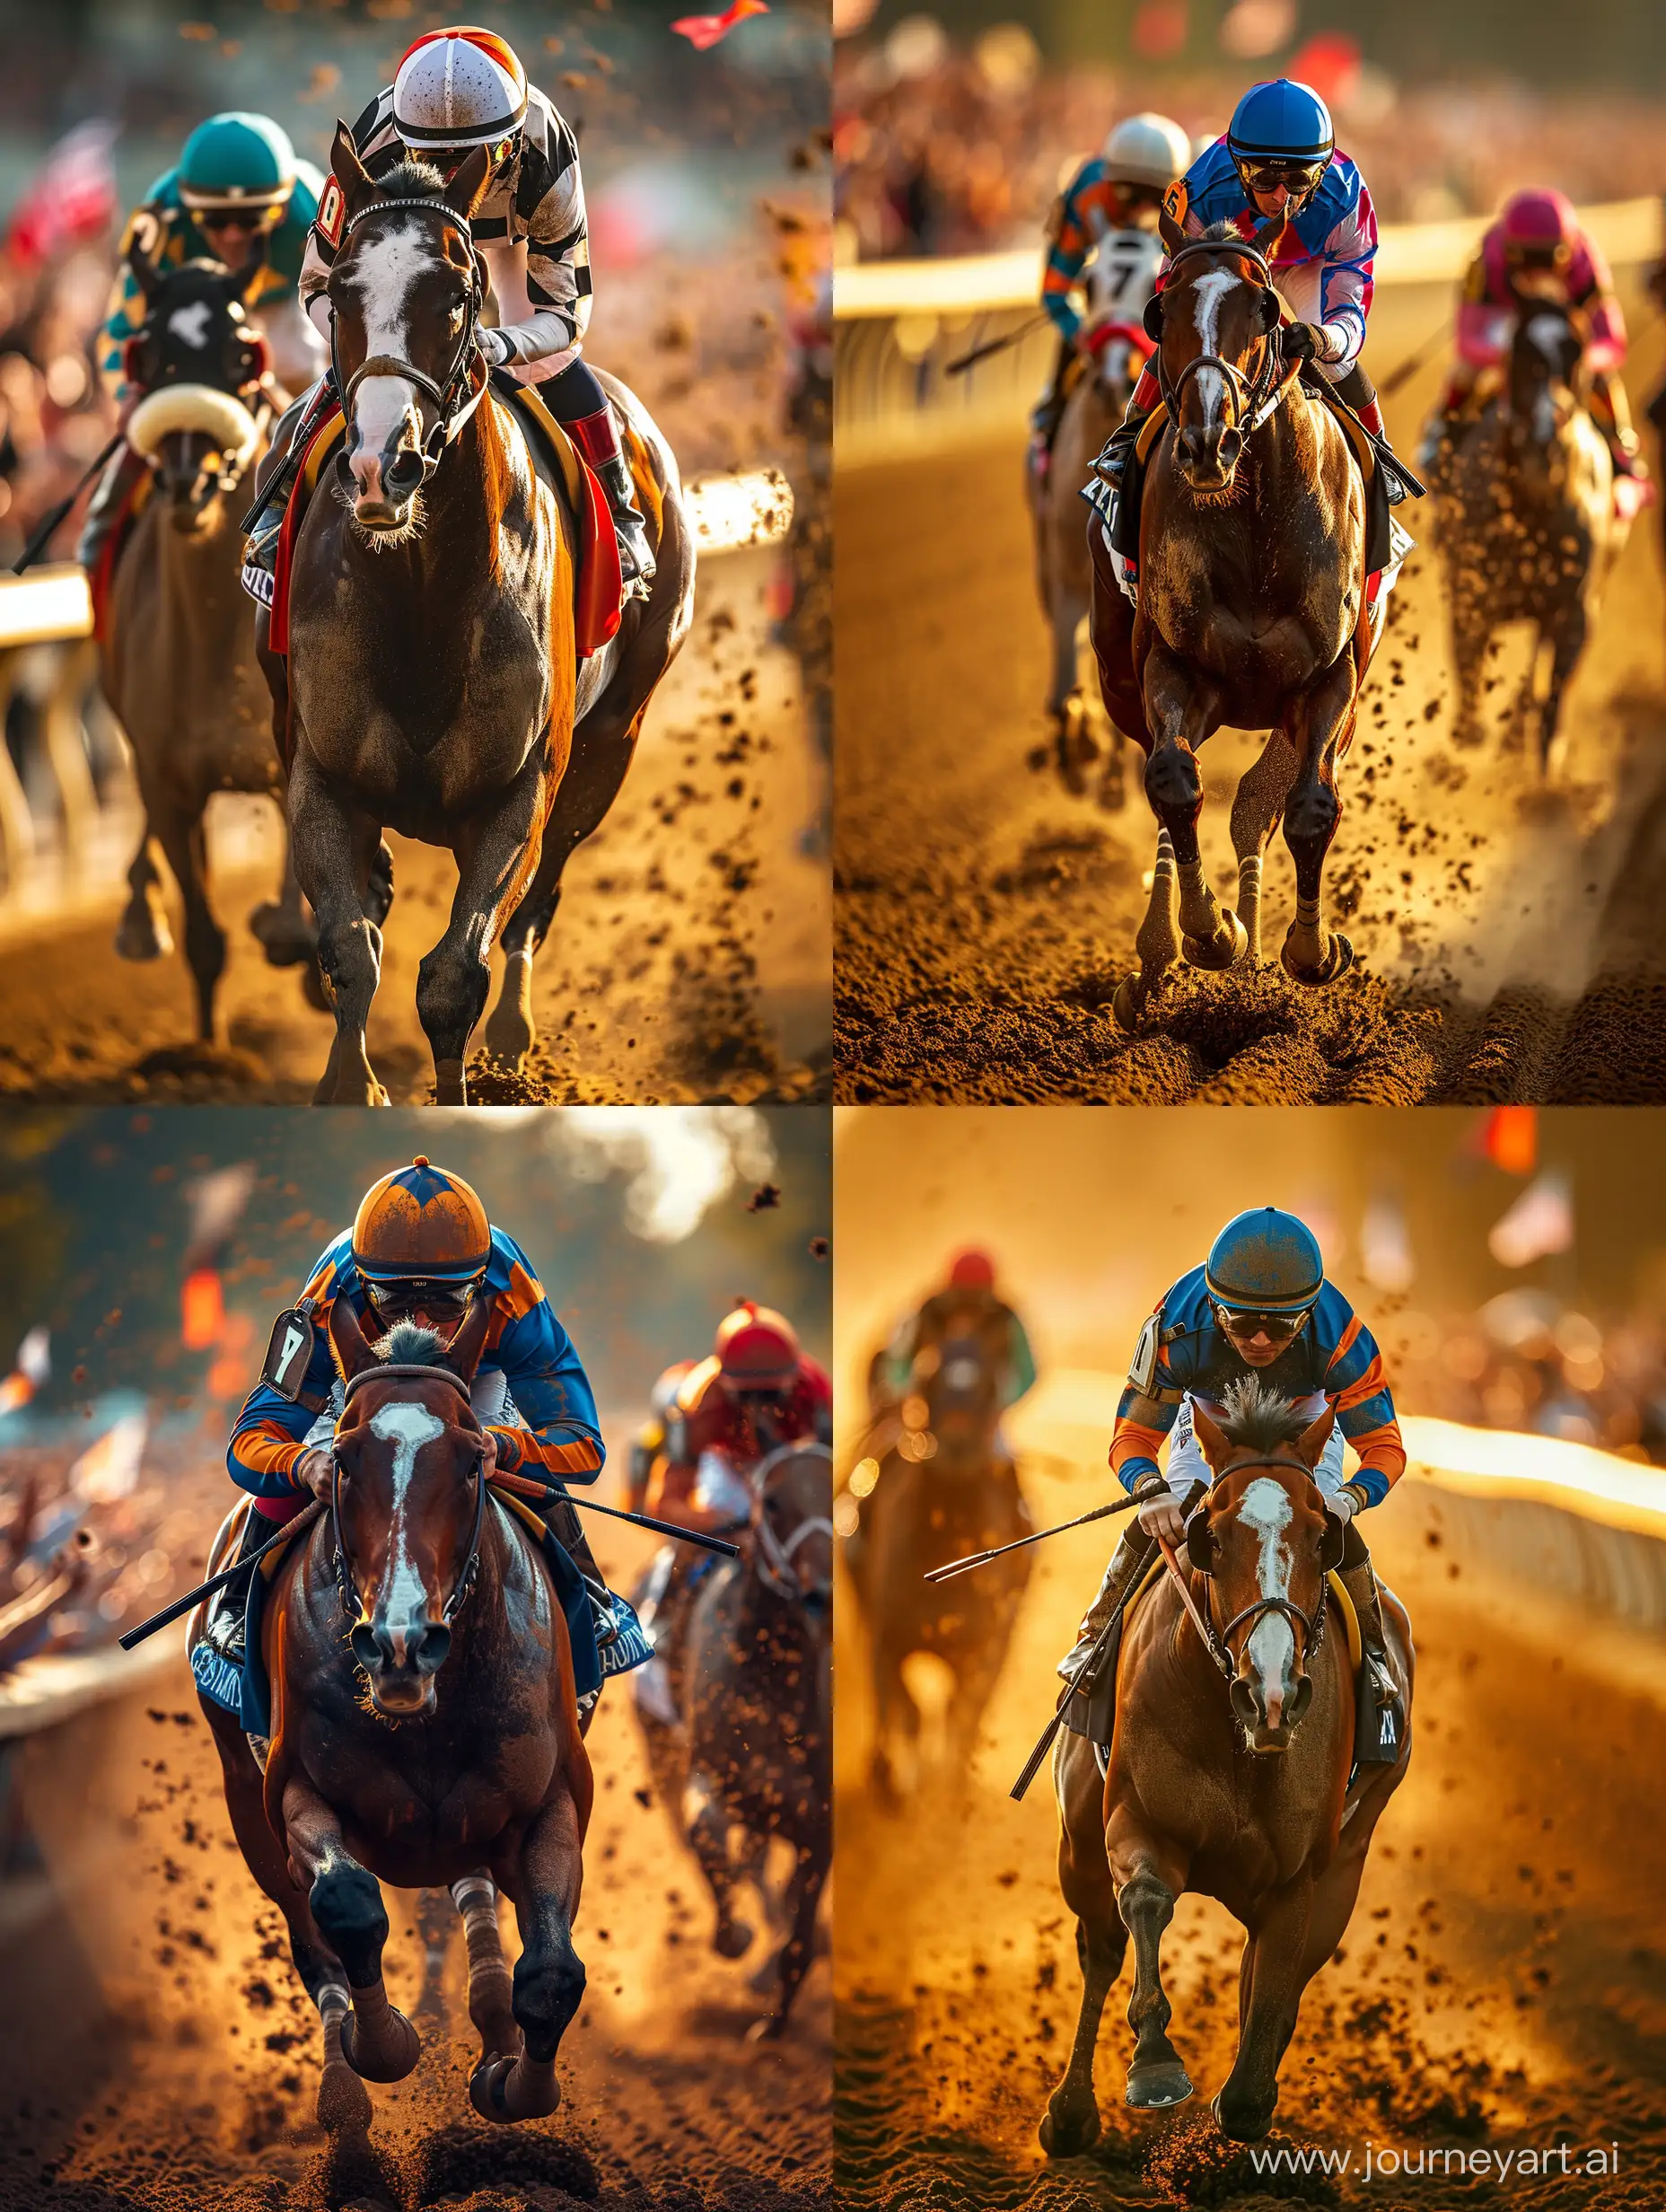 horse race, jockeys, colorful silks, sunlit track, spectators cheering, dust, galloping horses, determined expressions, lead, intense competition, fluttering flags, vibrant atmosphere, wide-angle shot, sunny weather, bright lighting --stylize 500